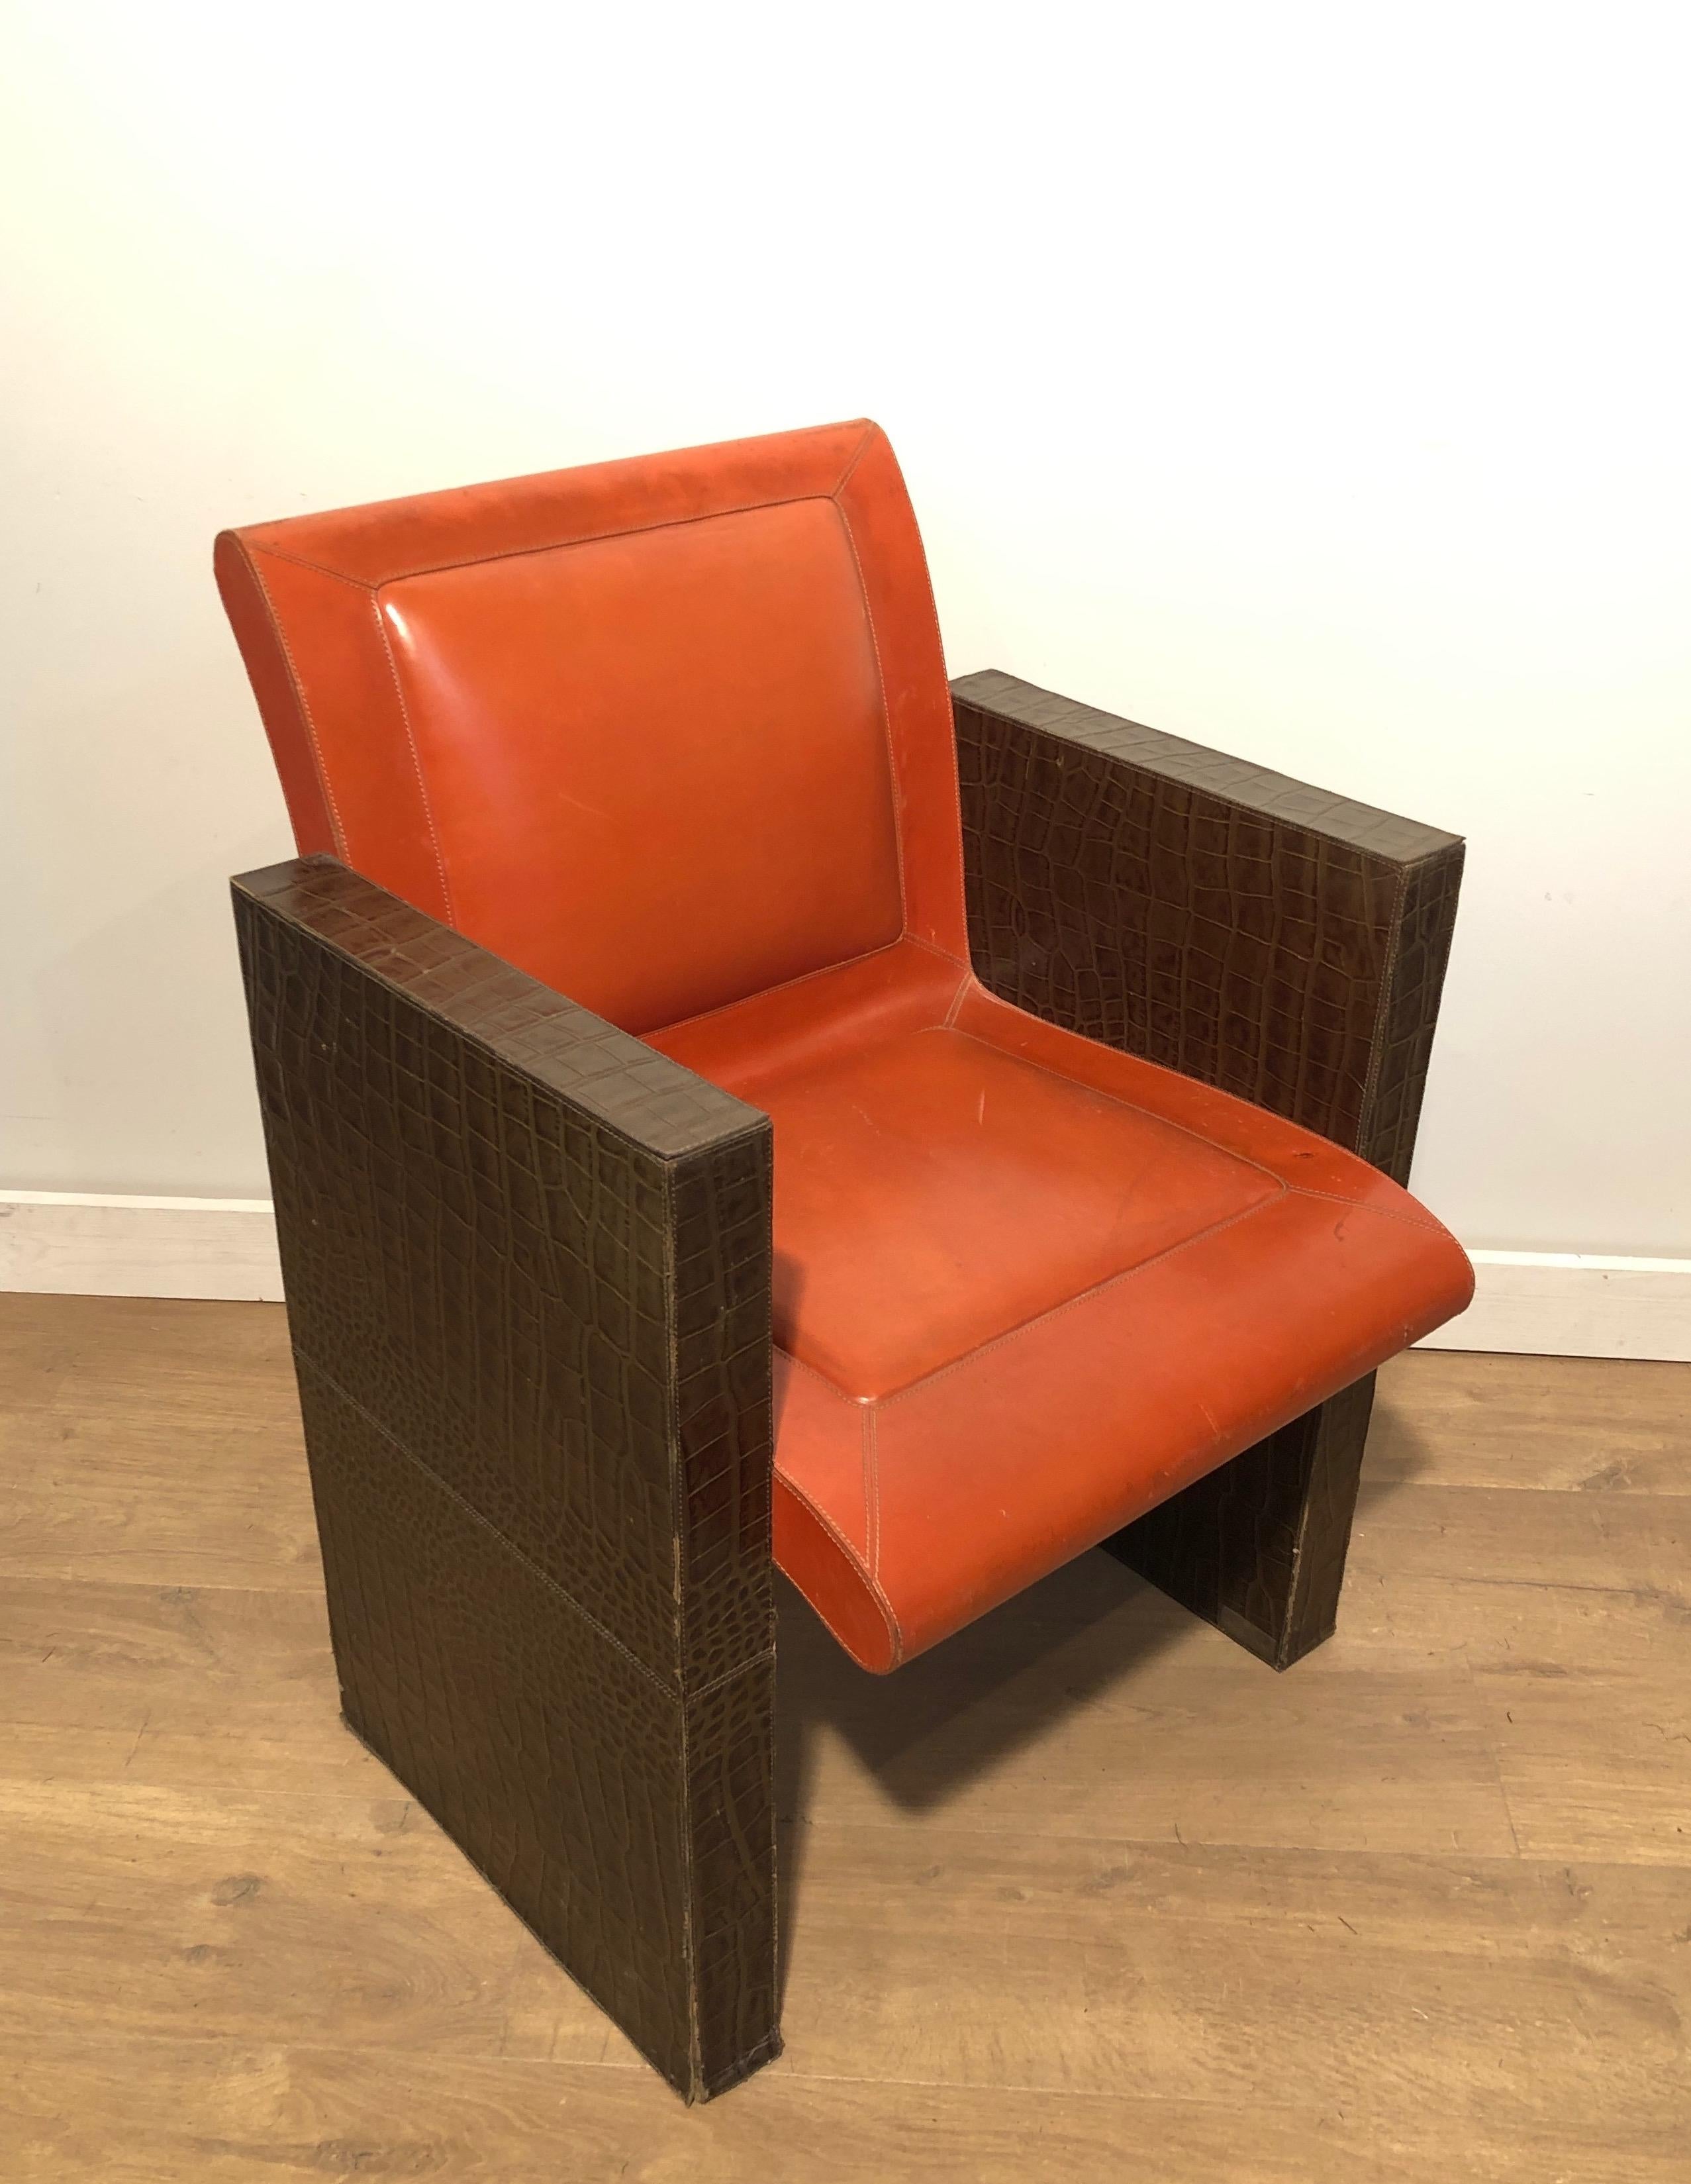 European Pair of orangeish and brown leather armchairs (Can be sold individually).  For Sale